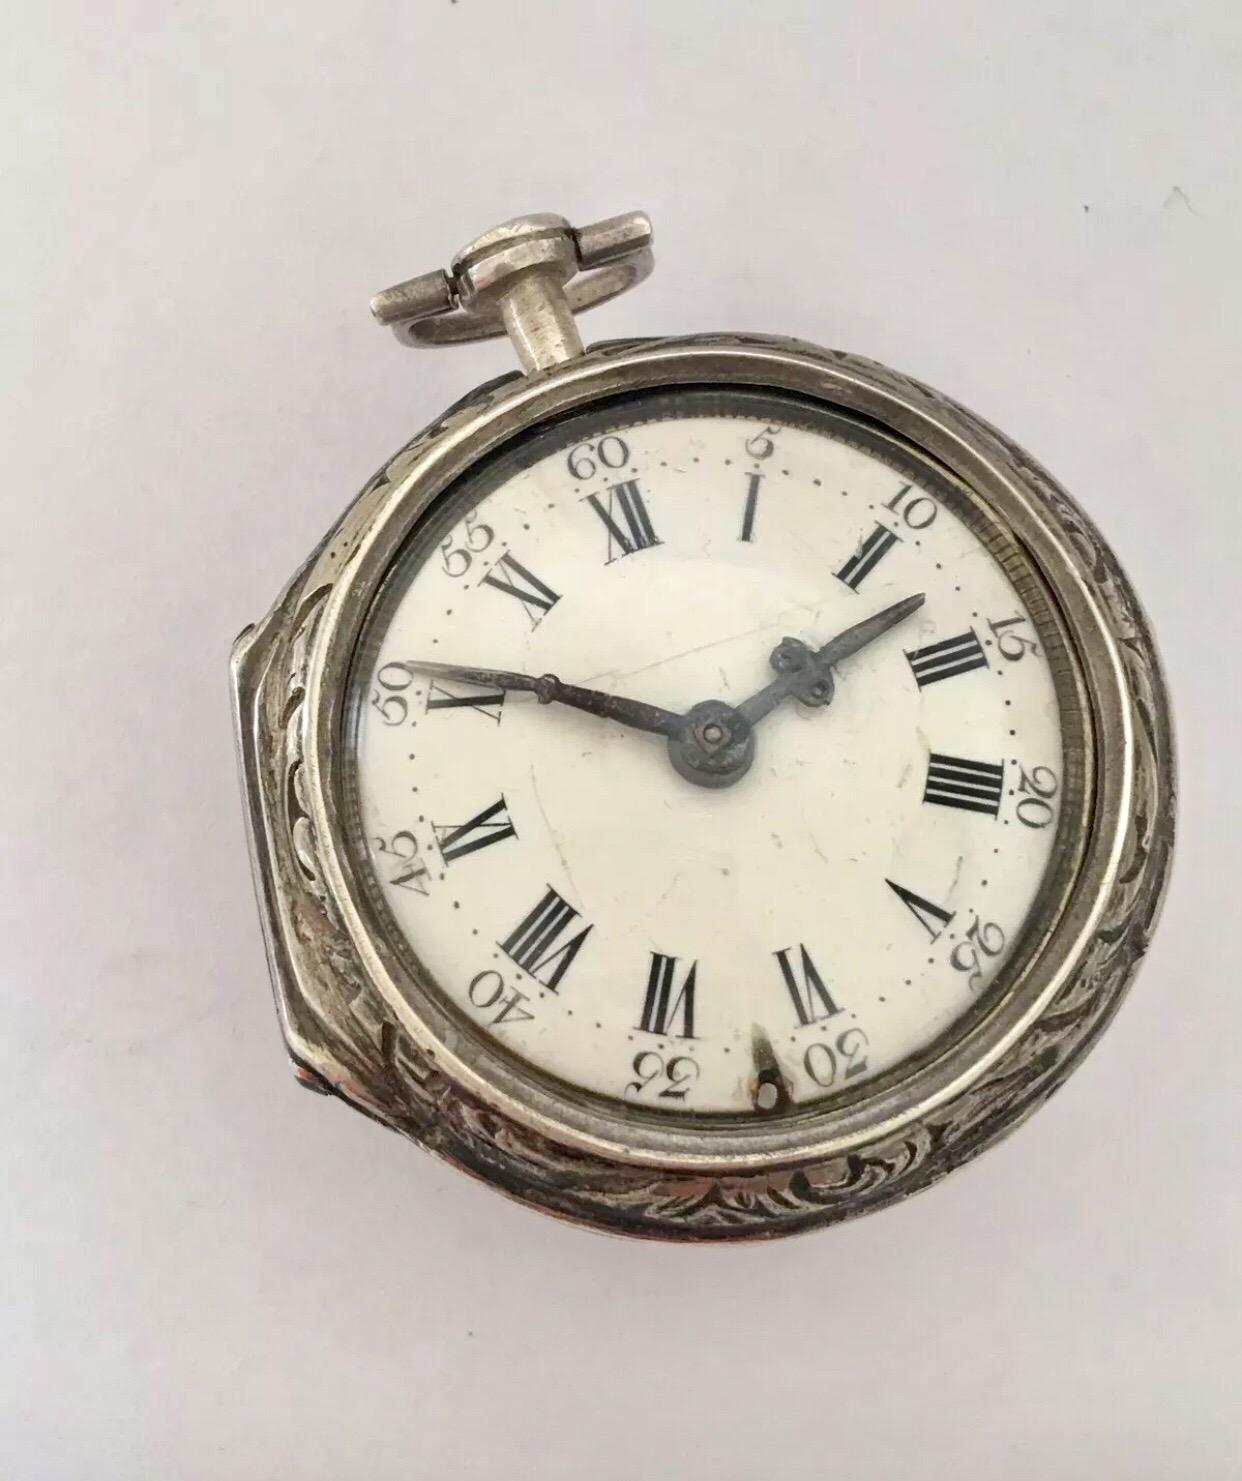 
Early Verge Fusee Repousse Silver Pocket Watch By Thomas Lambford, London c.1768.


This watch is working and ticking well. However, Due to its age, I cannot guarantee the time accuracy. Some scratches on the glass